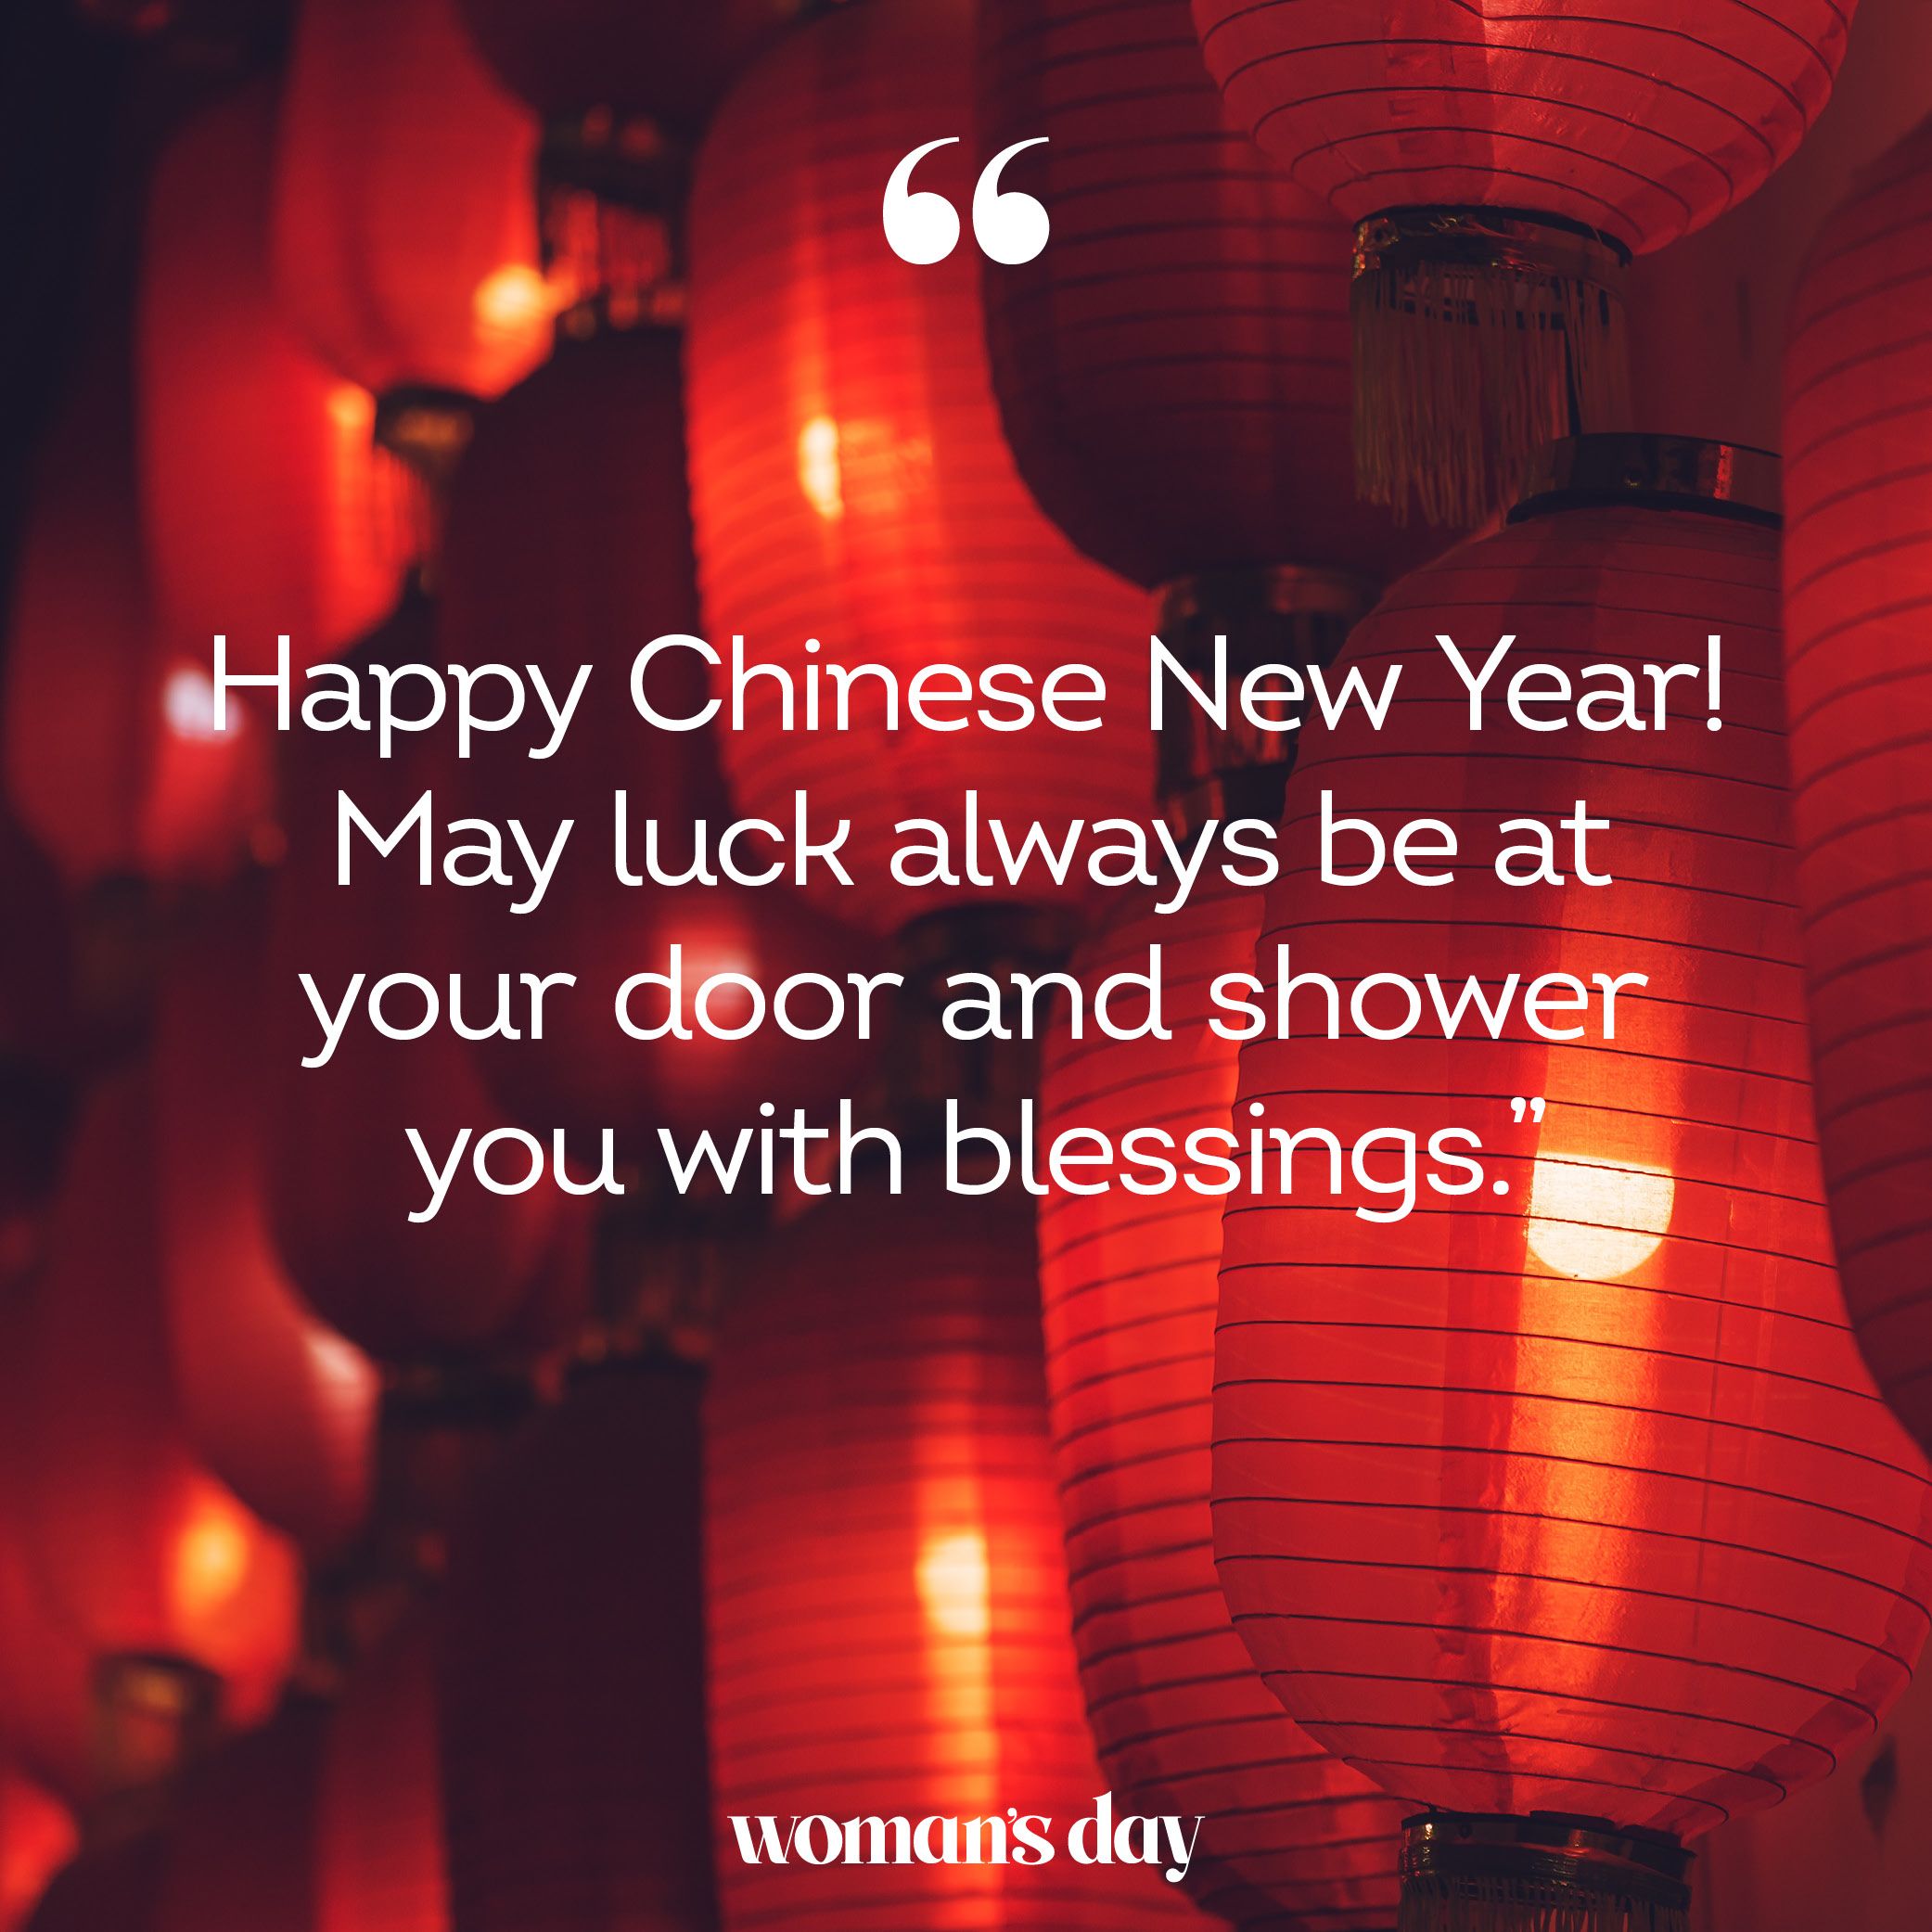 how-do-you-greet-someone-happy-chinese-new-year